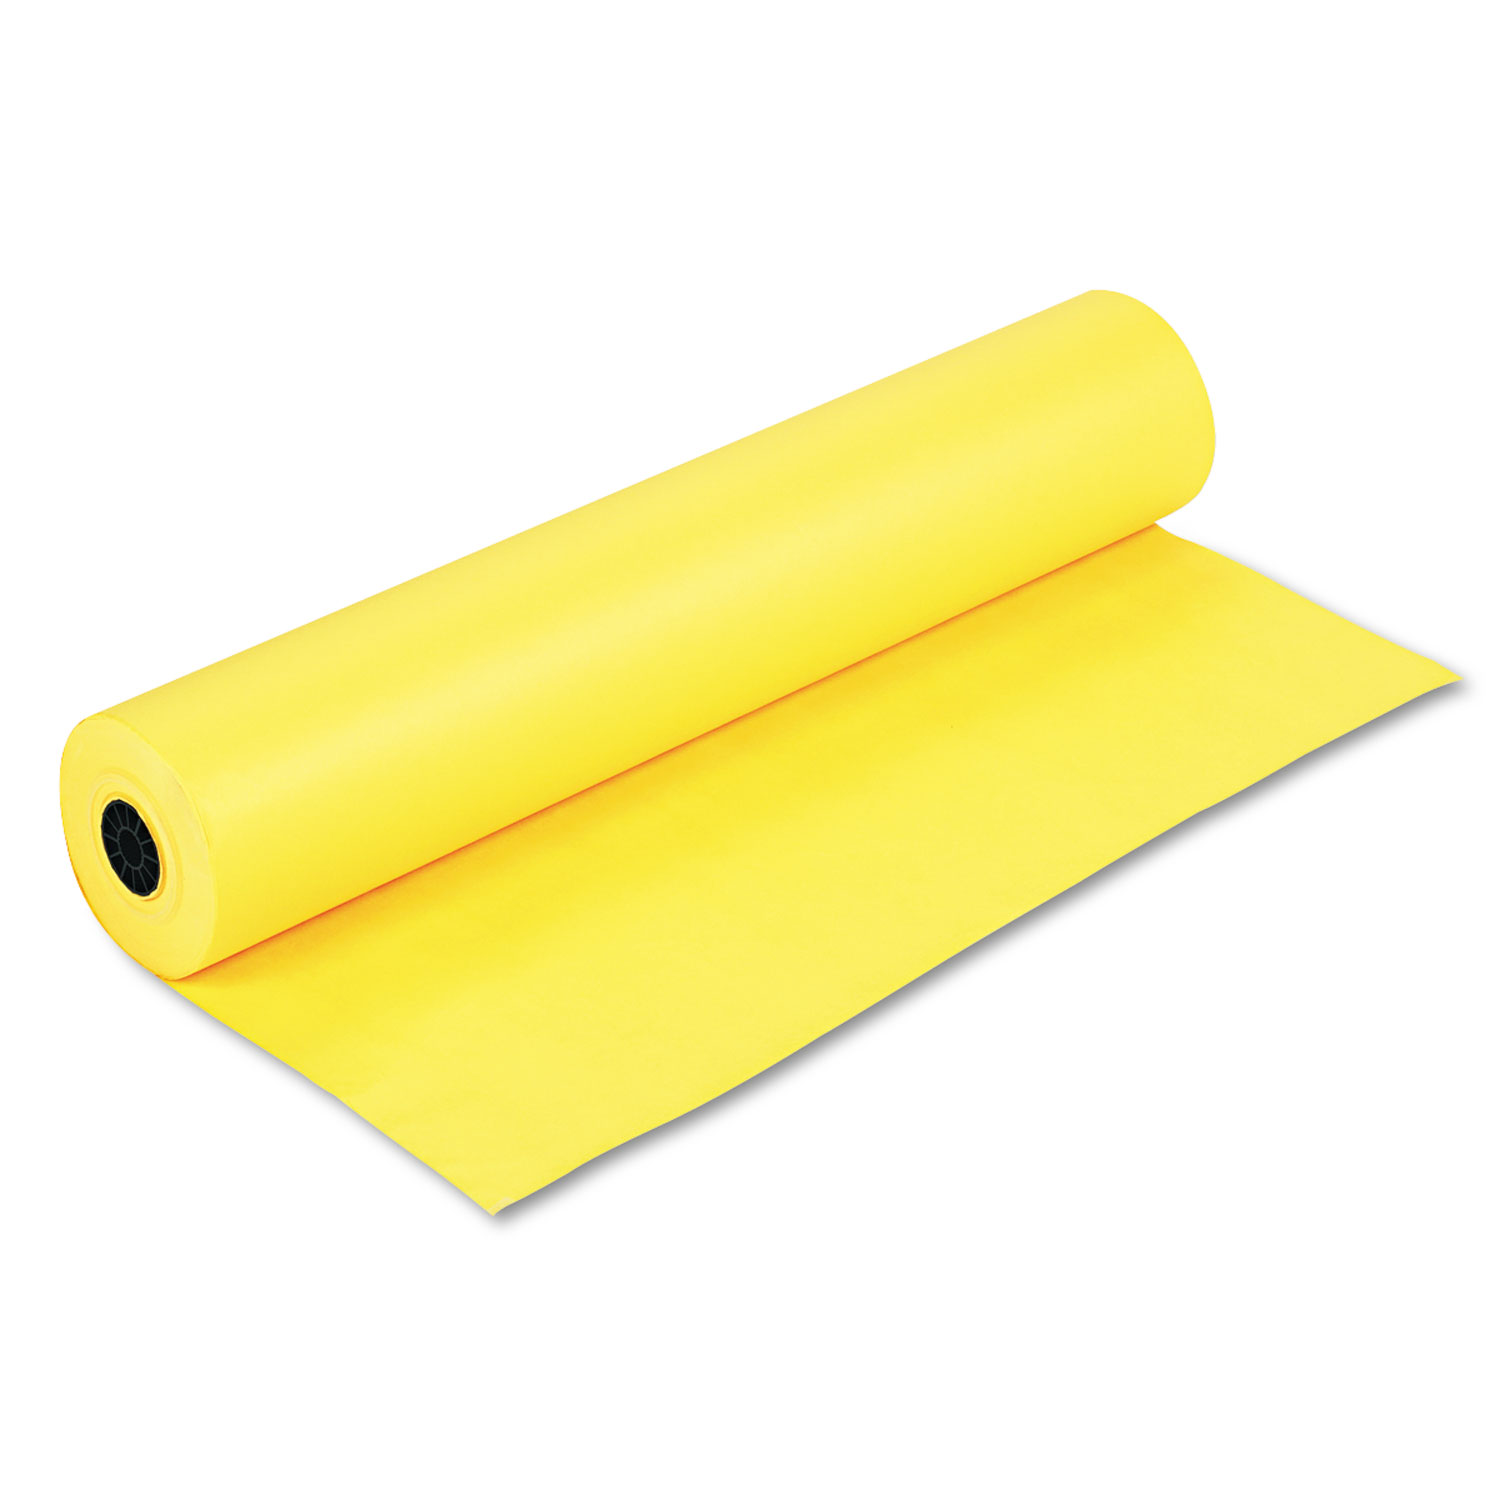  Pacon 63080 Rainbow Duo-Finish Colored Kraft Paper, 35lb, 36 x 1000ft, Canary (PAC63080) 